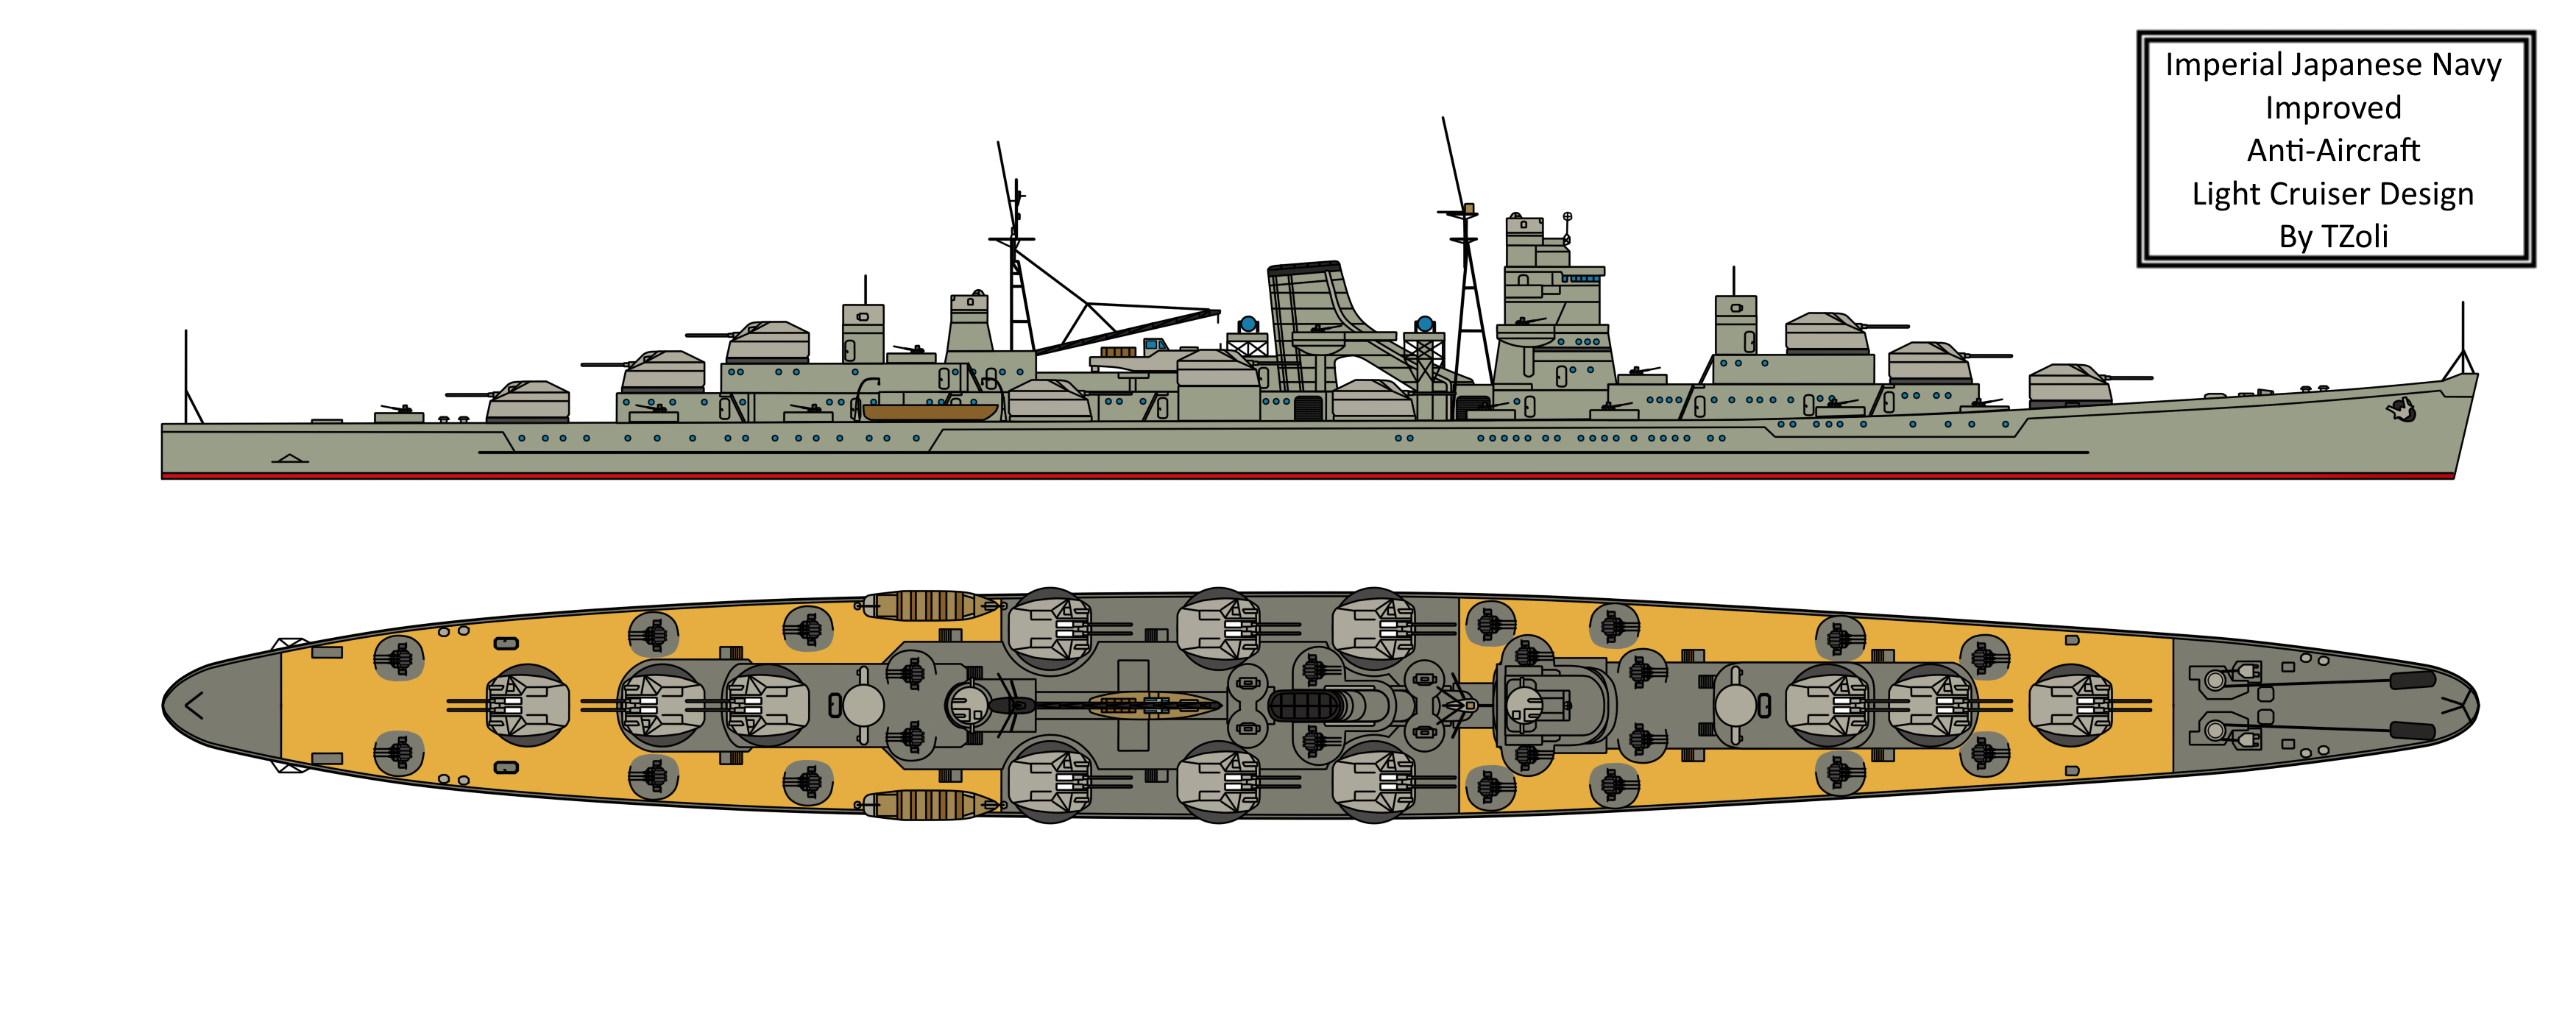 improved_ijn_aa_cruiser_coloured_by_tzoli-d7qe2ah.png